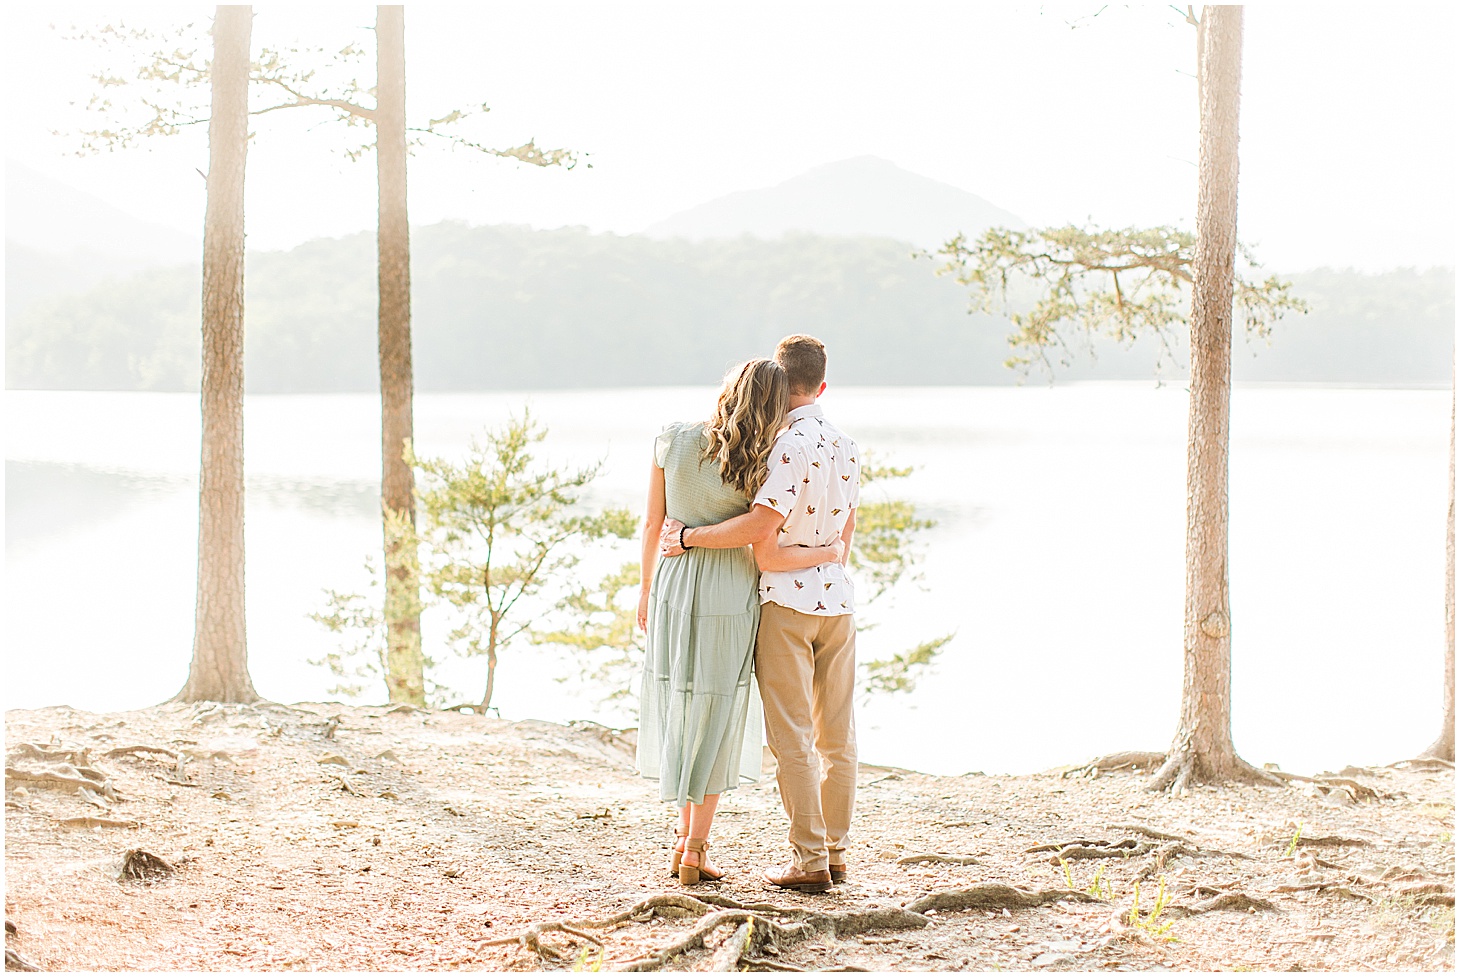 carvinscove_roanokeengagementsession_virginiaweddingphotographer_vaweddingphotographer_photo_0008.jpg